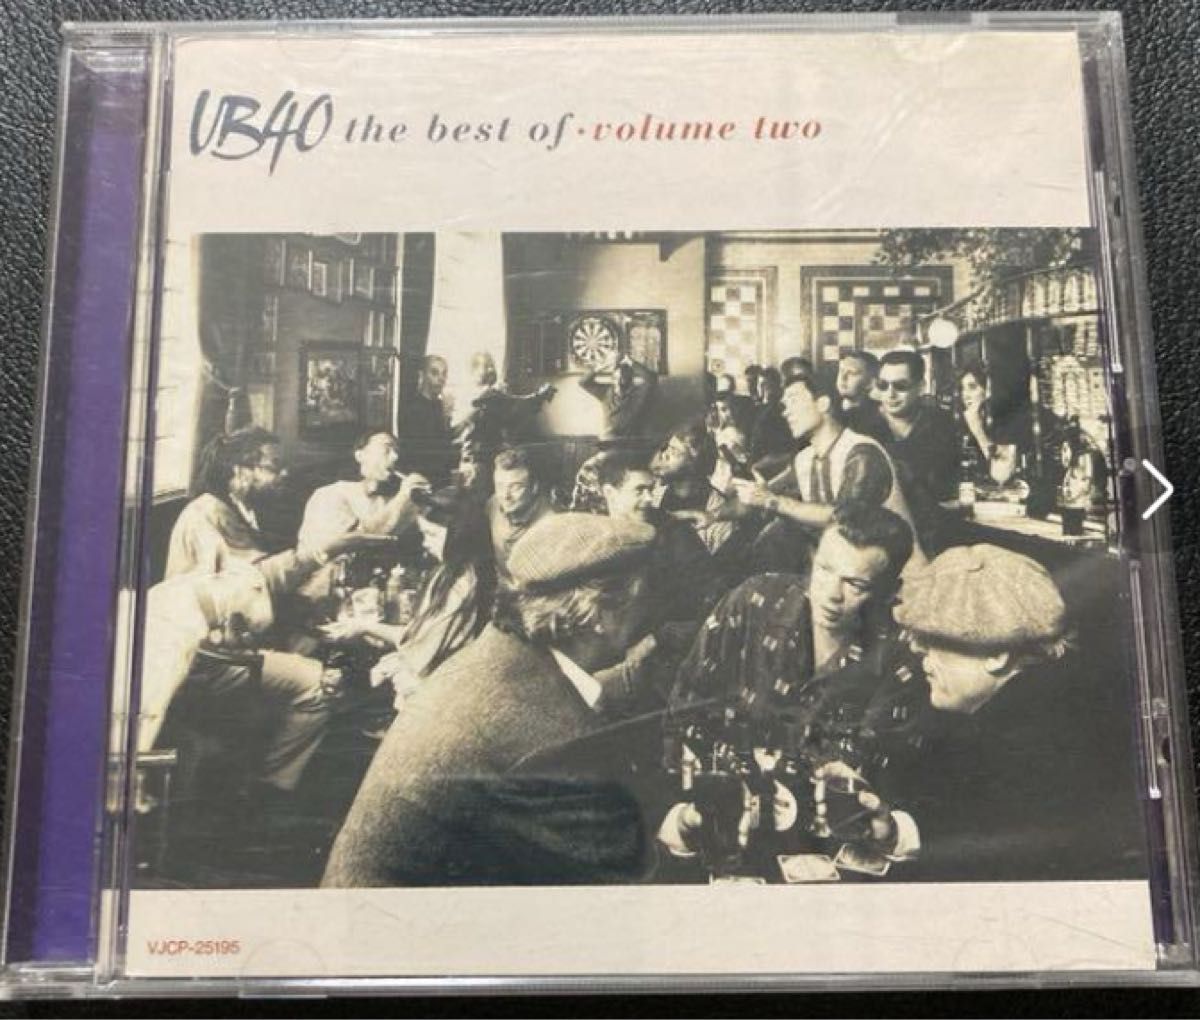 UB40 THE BEST OF volume two CD